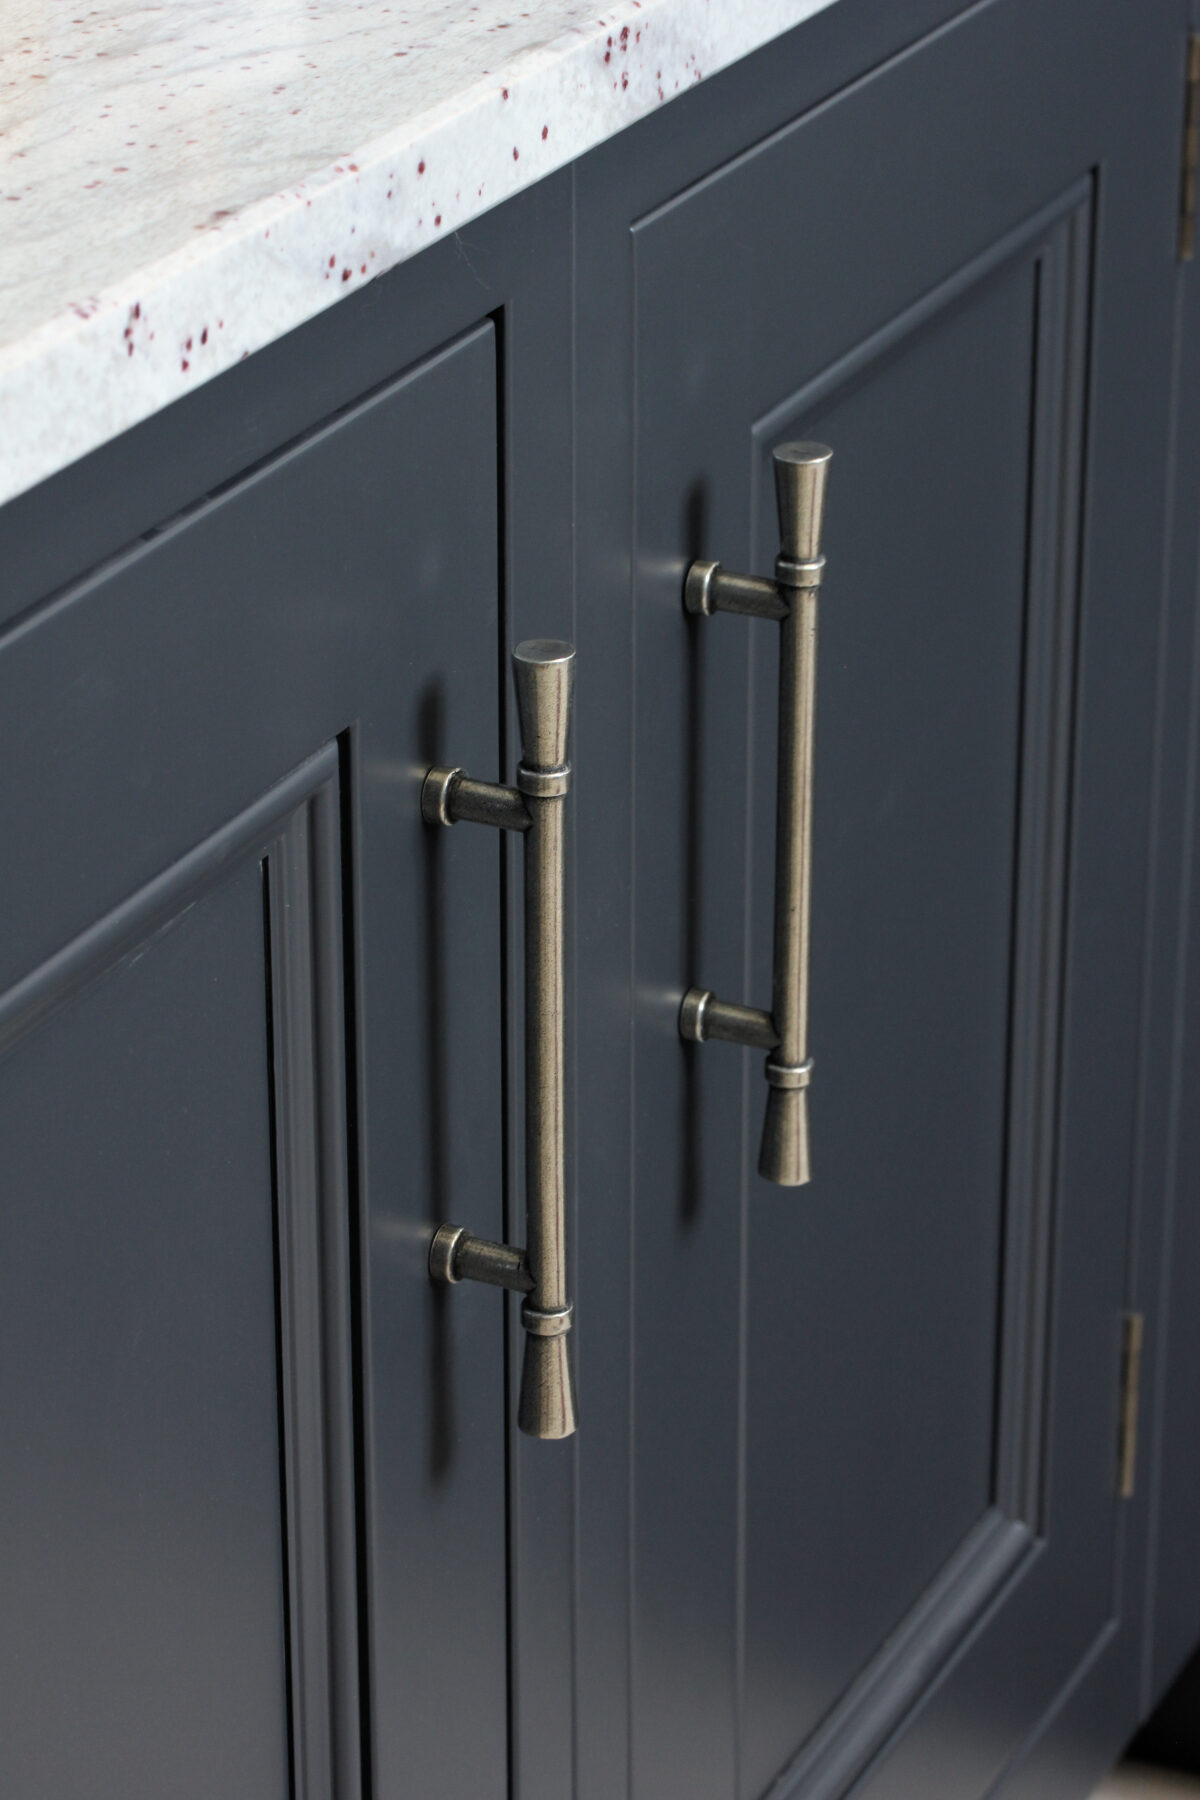 Pewter cupboard handle on navy kitchen cupboards